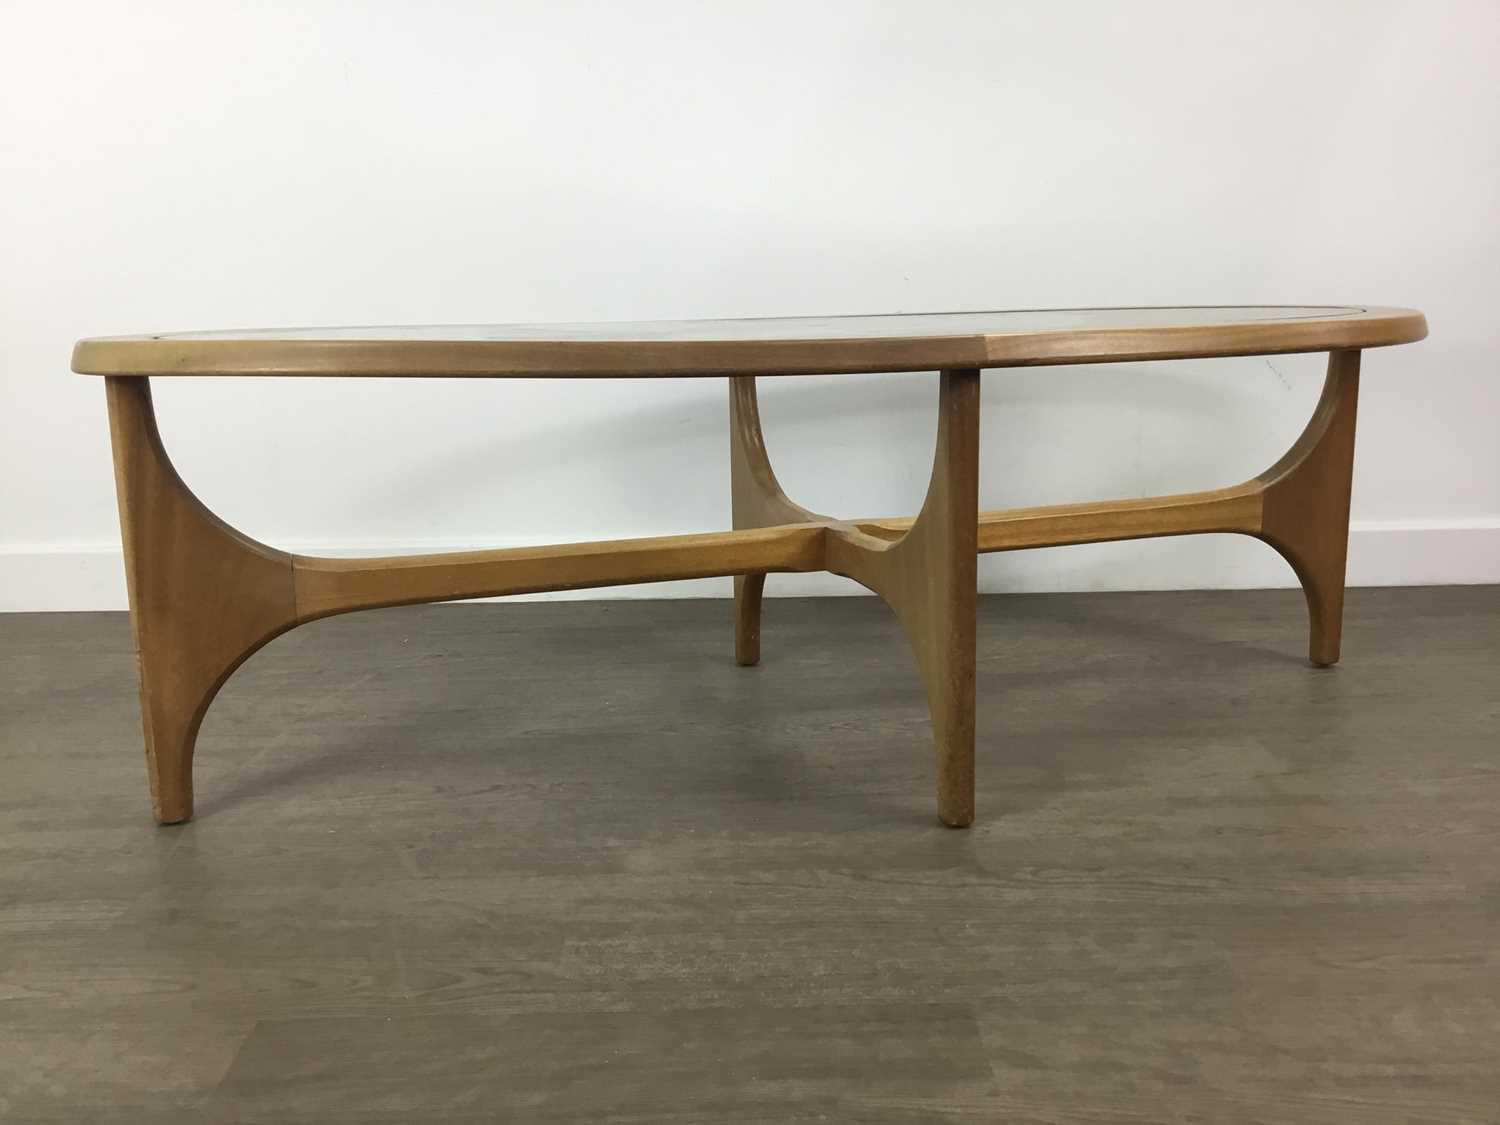 STONEHILL OF LONDON, 'STATEROOM' COFFEE TABLE, CIRCA 1960-69